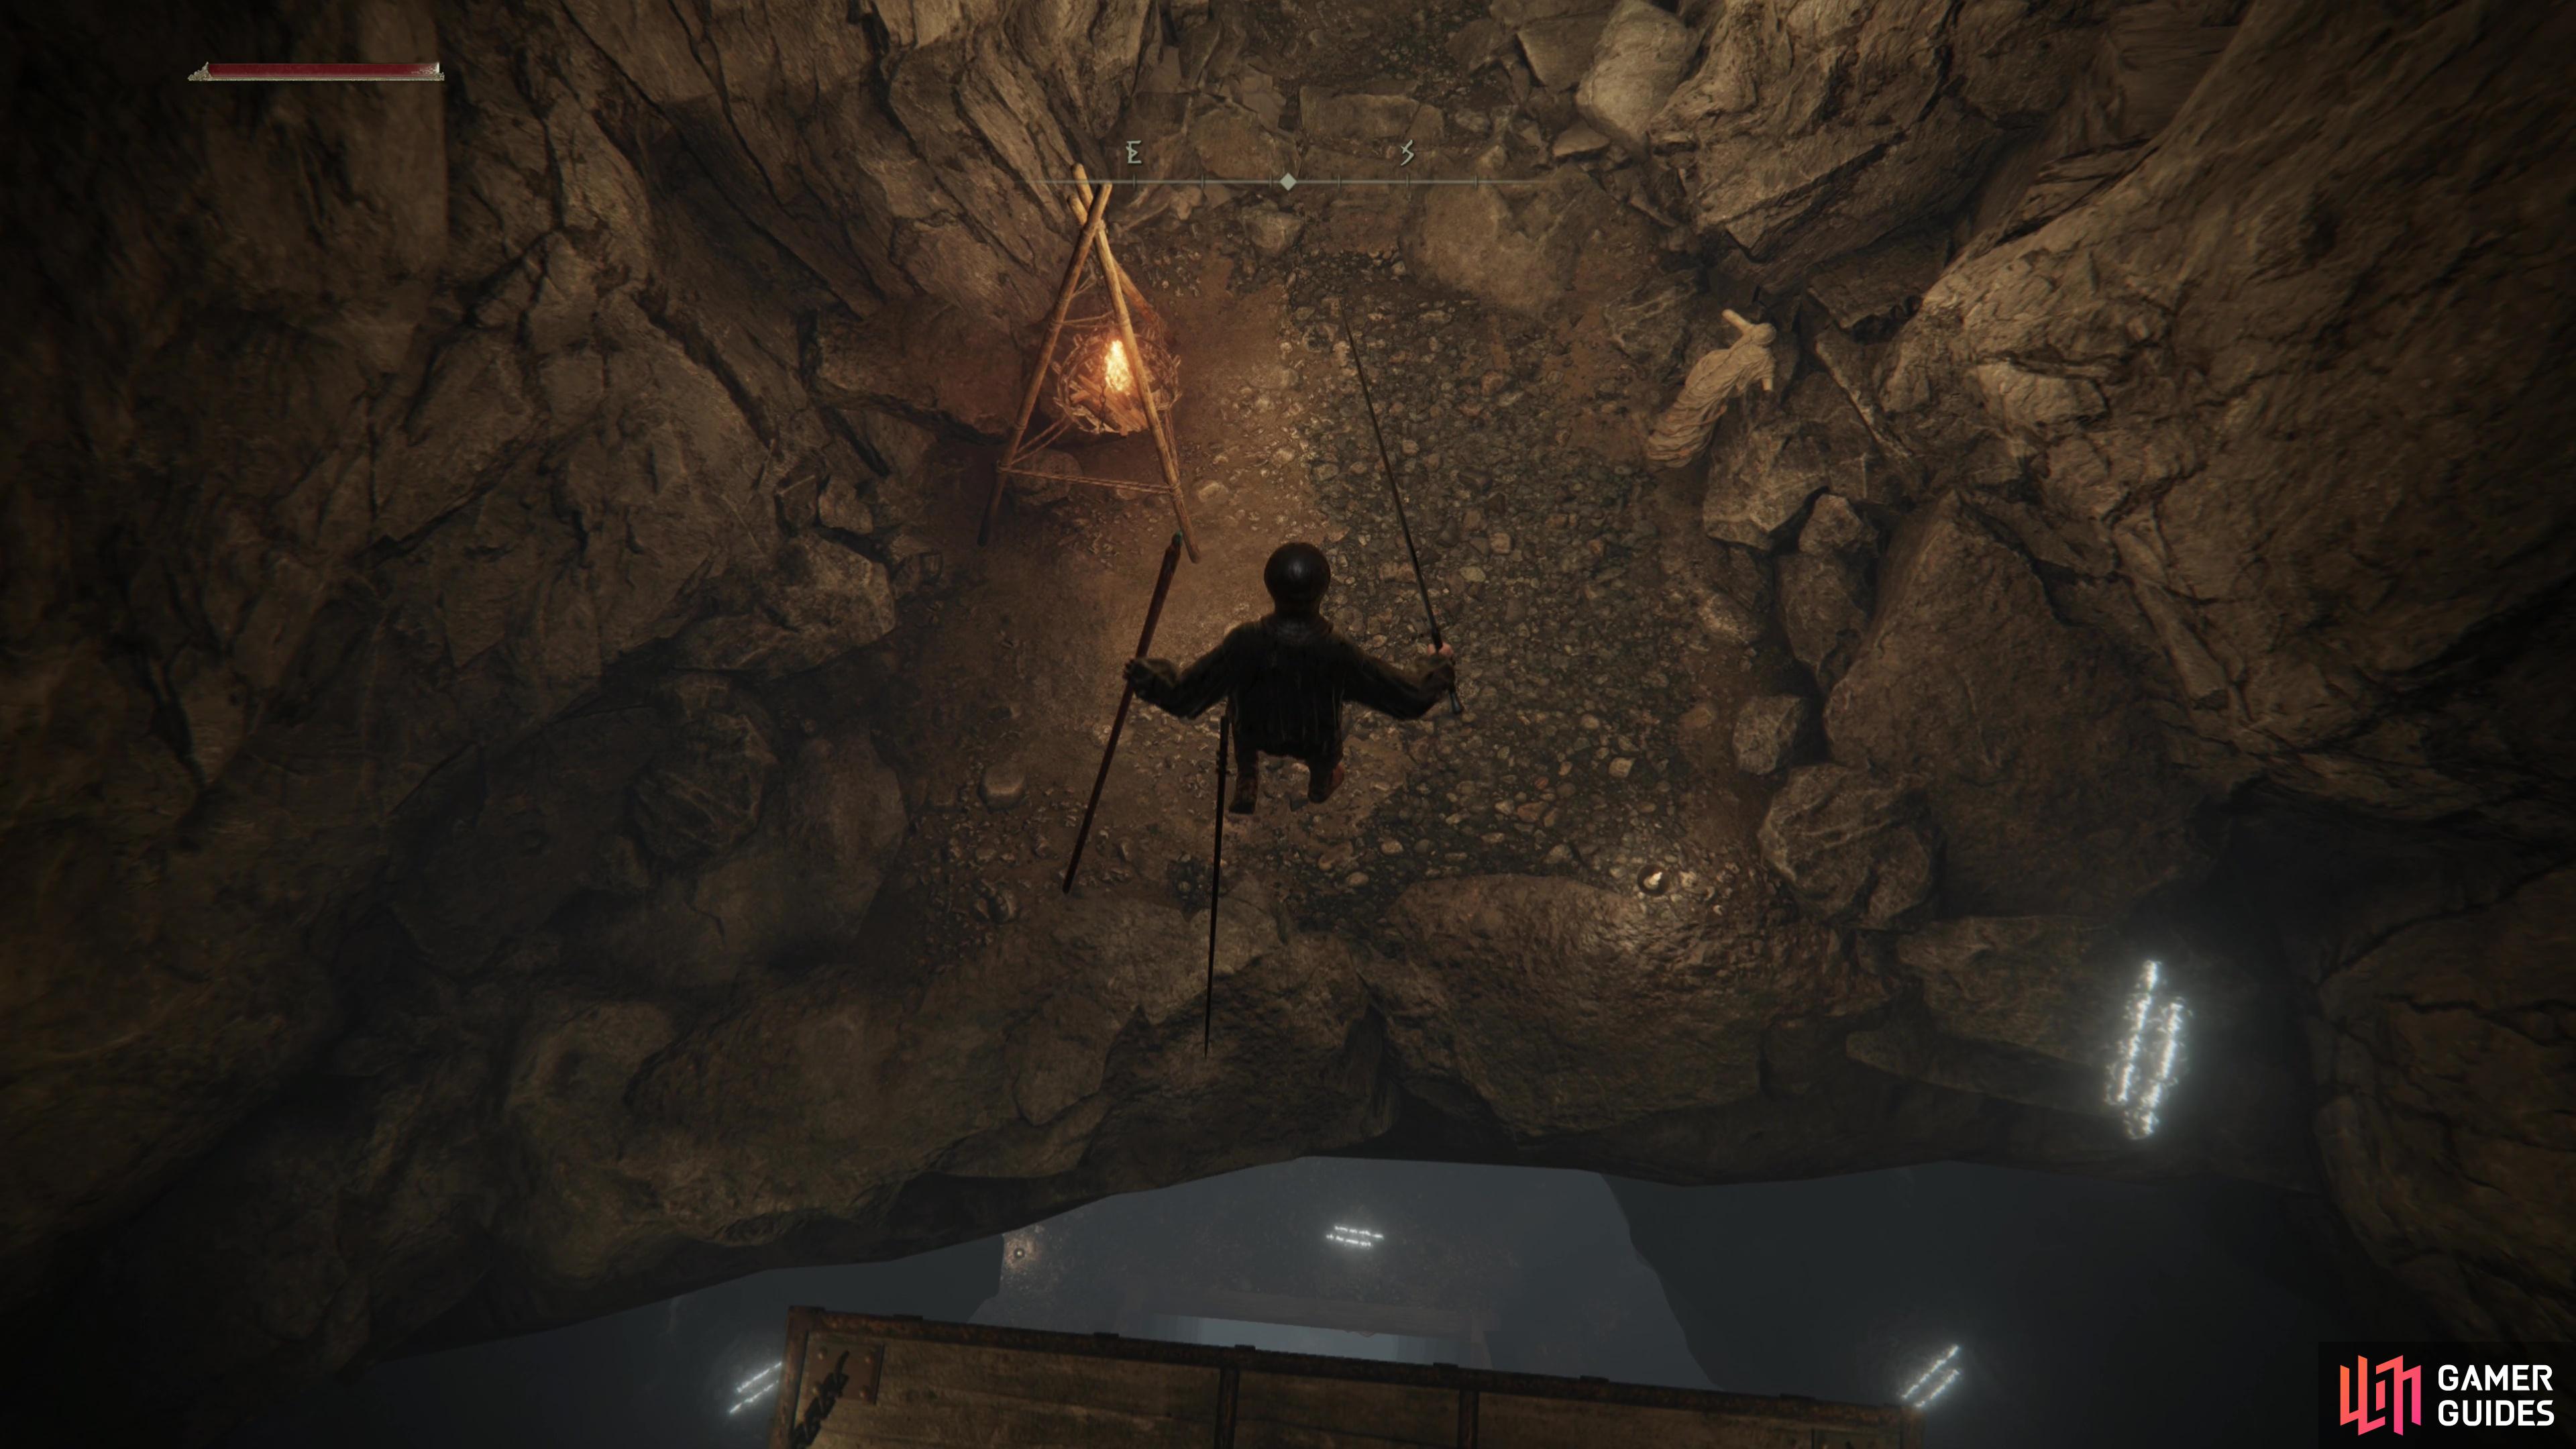 To progress deeper into the mine, you'll need to jump to a ledge as you ride an elevator.